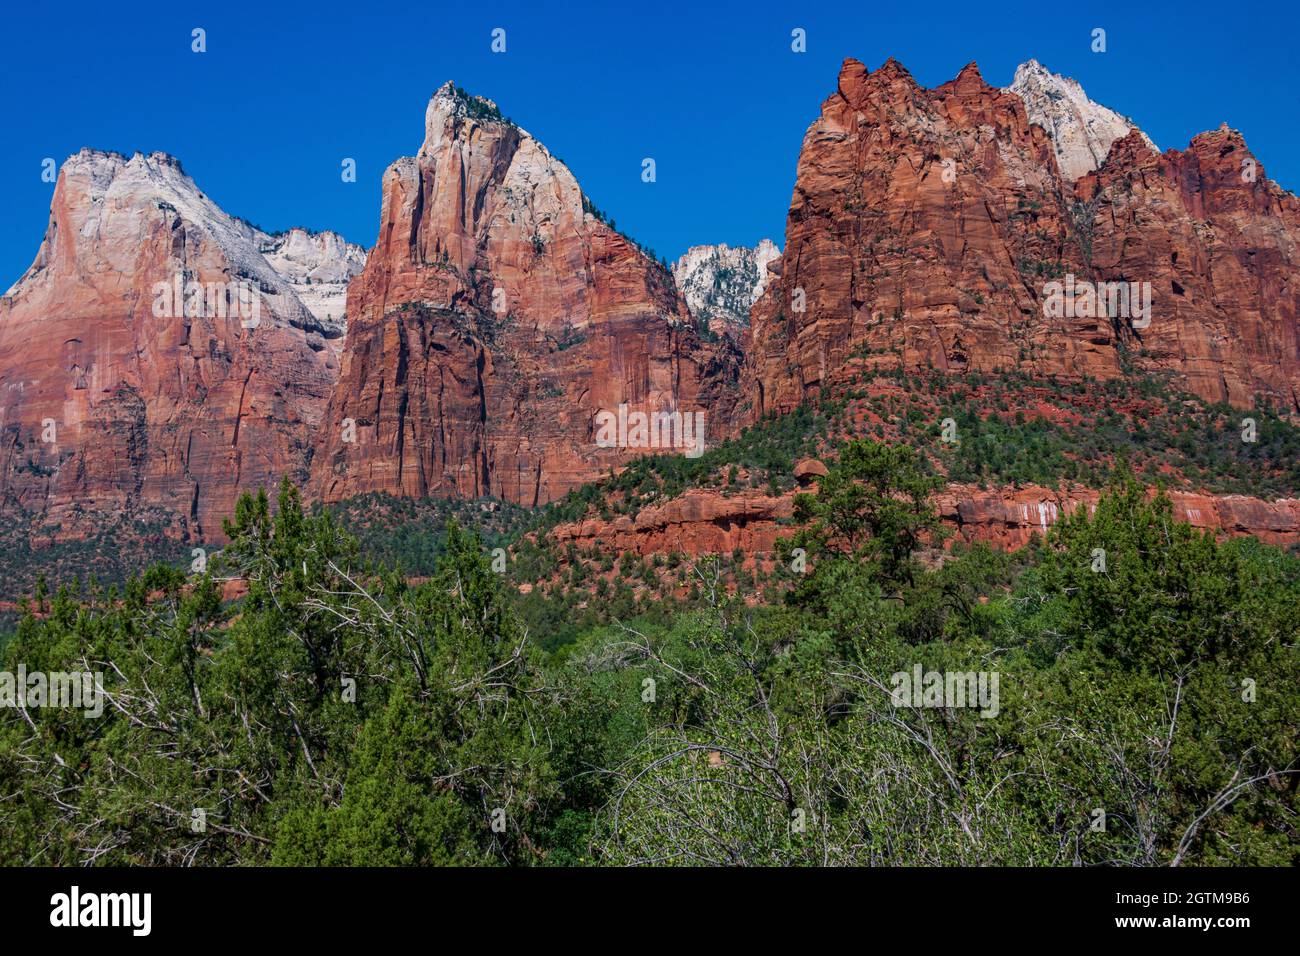 The Patriarchs of Zion National park Stock Photo